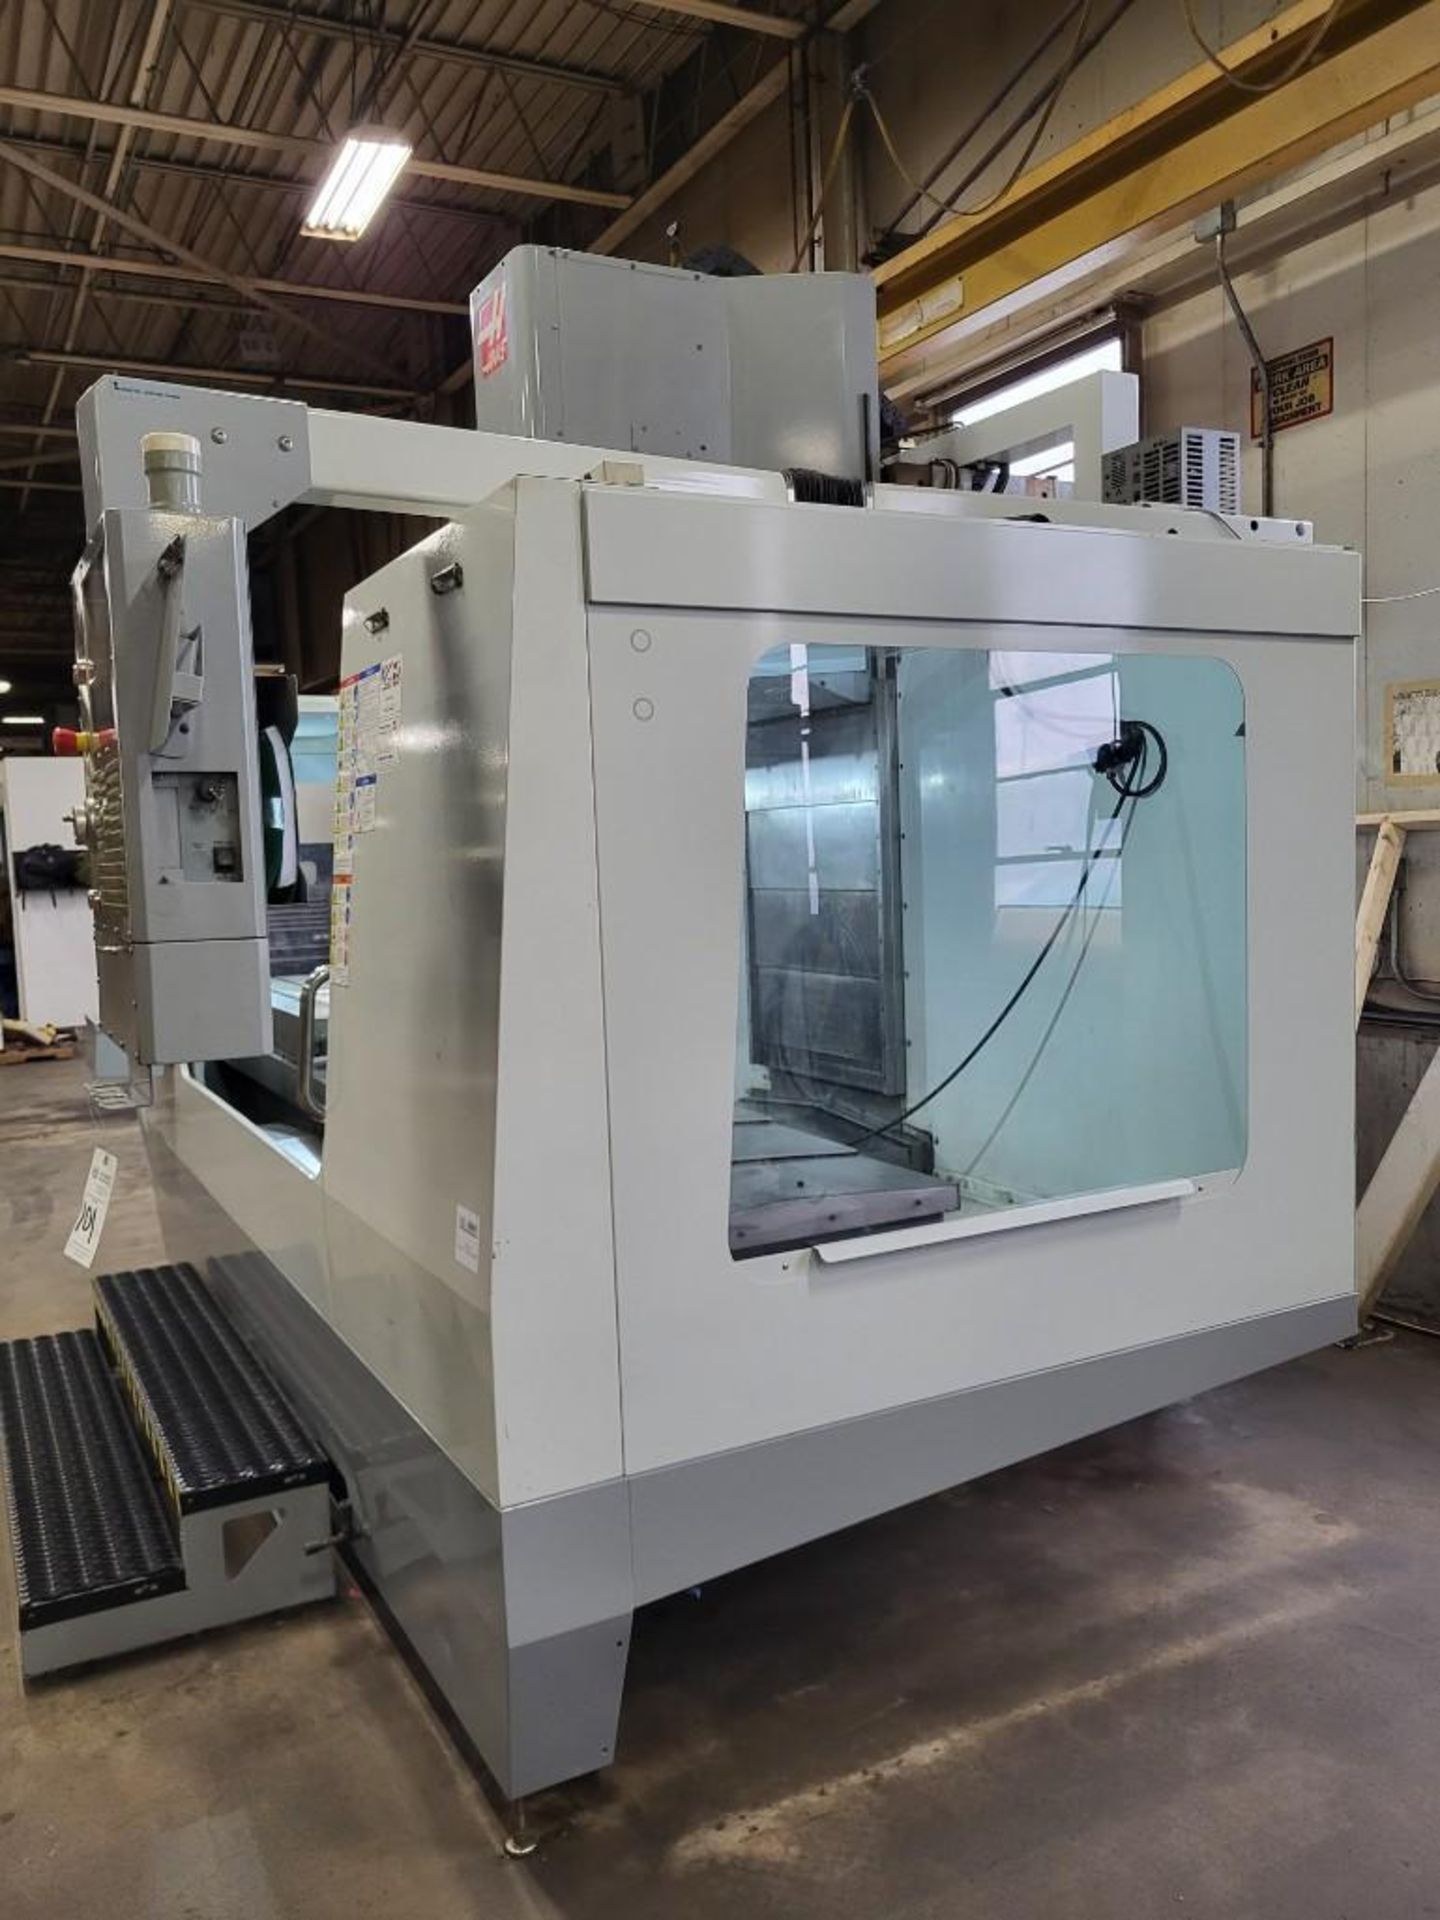 HAAS VF-6 D/40 VERTICAL MACHINING CENTER, 2007 - Image 16 of 19